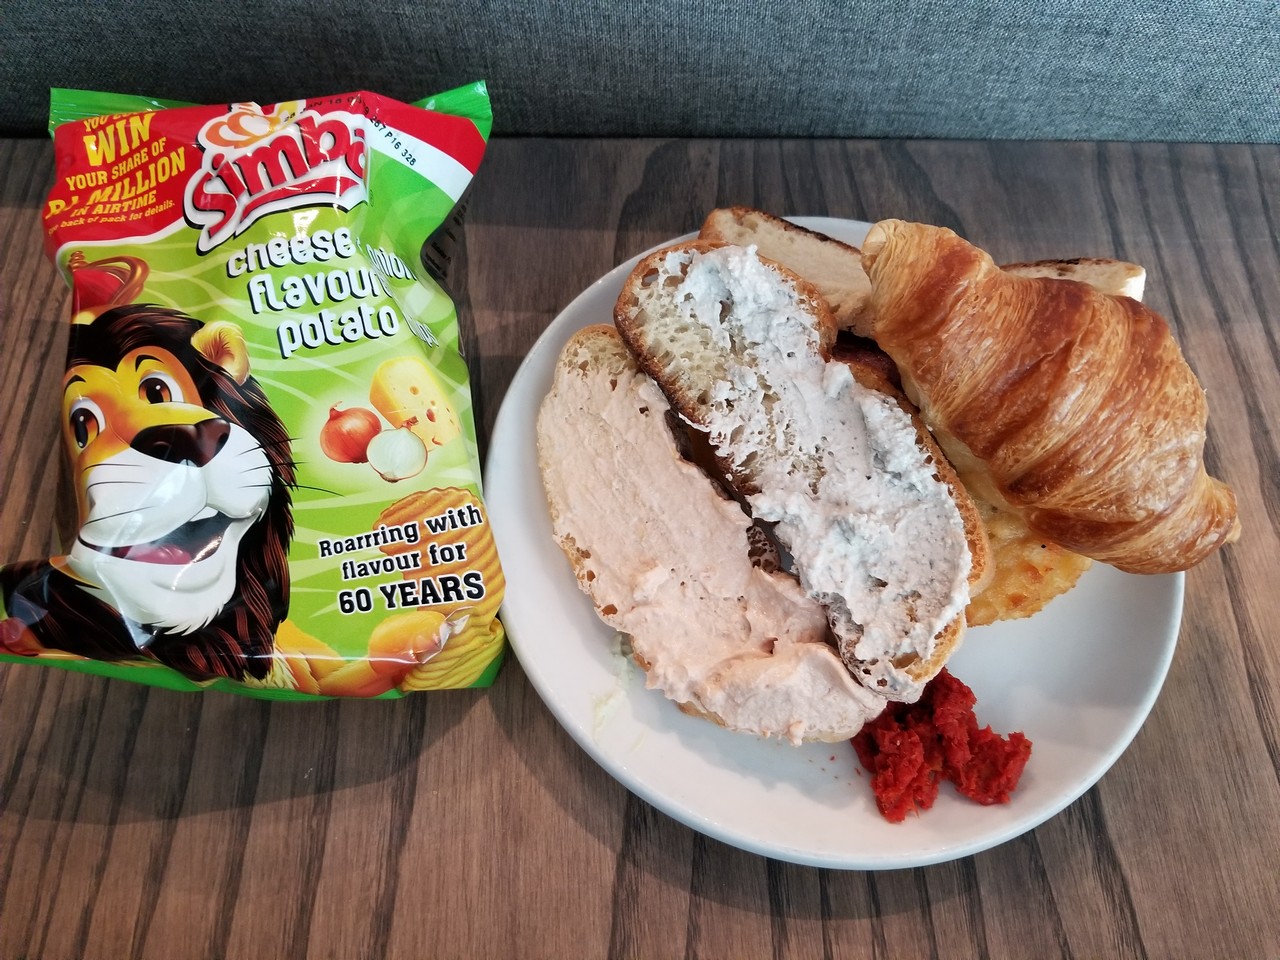 a sandwich and a bag of chips on a table